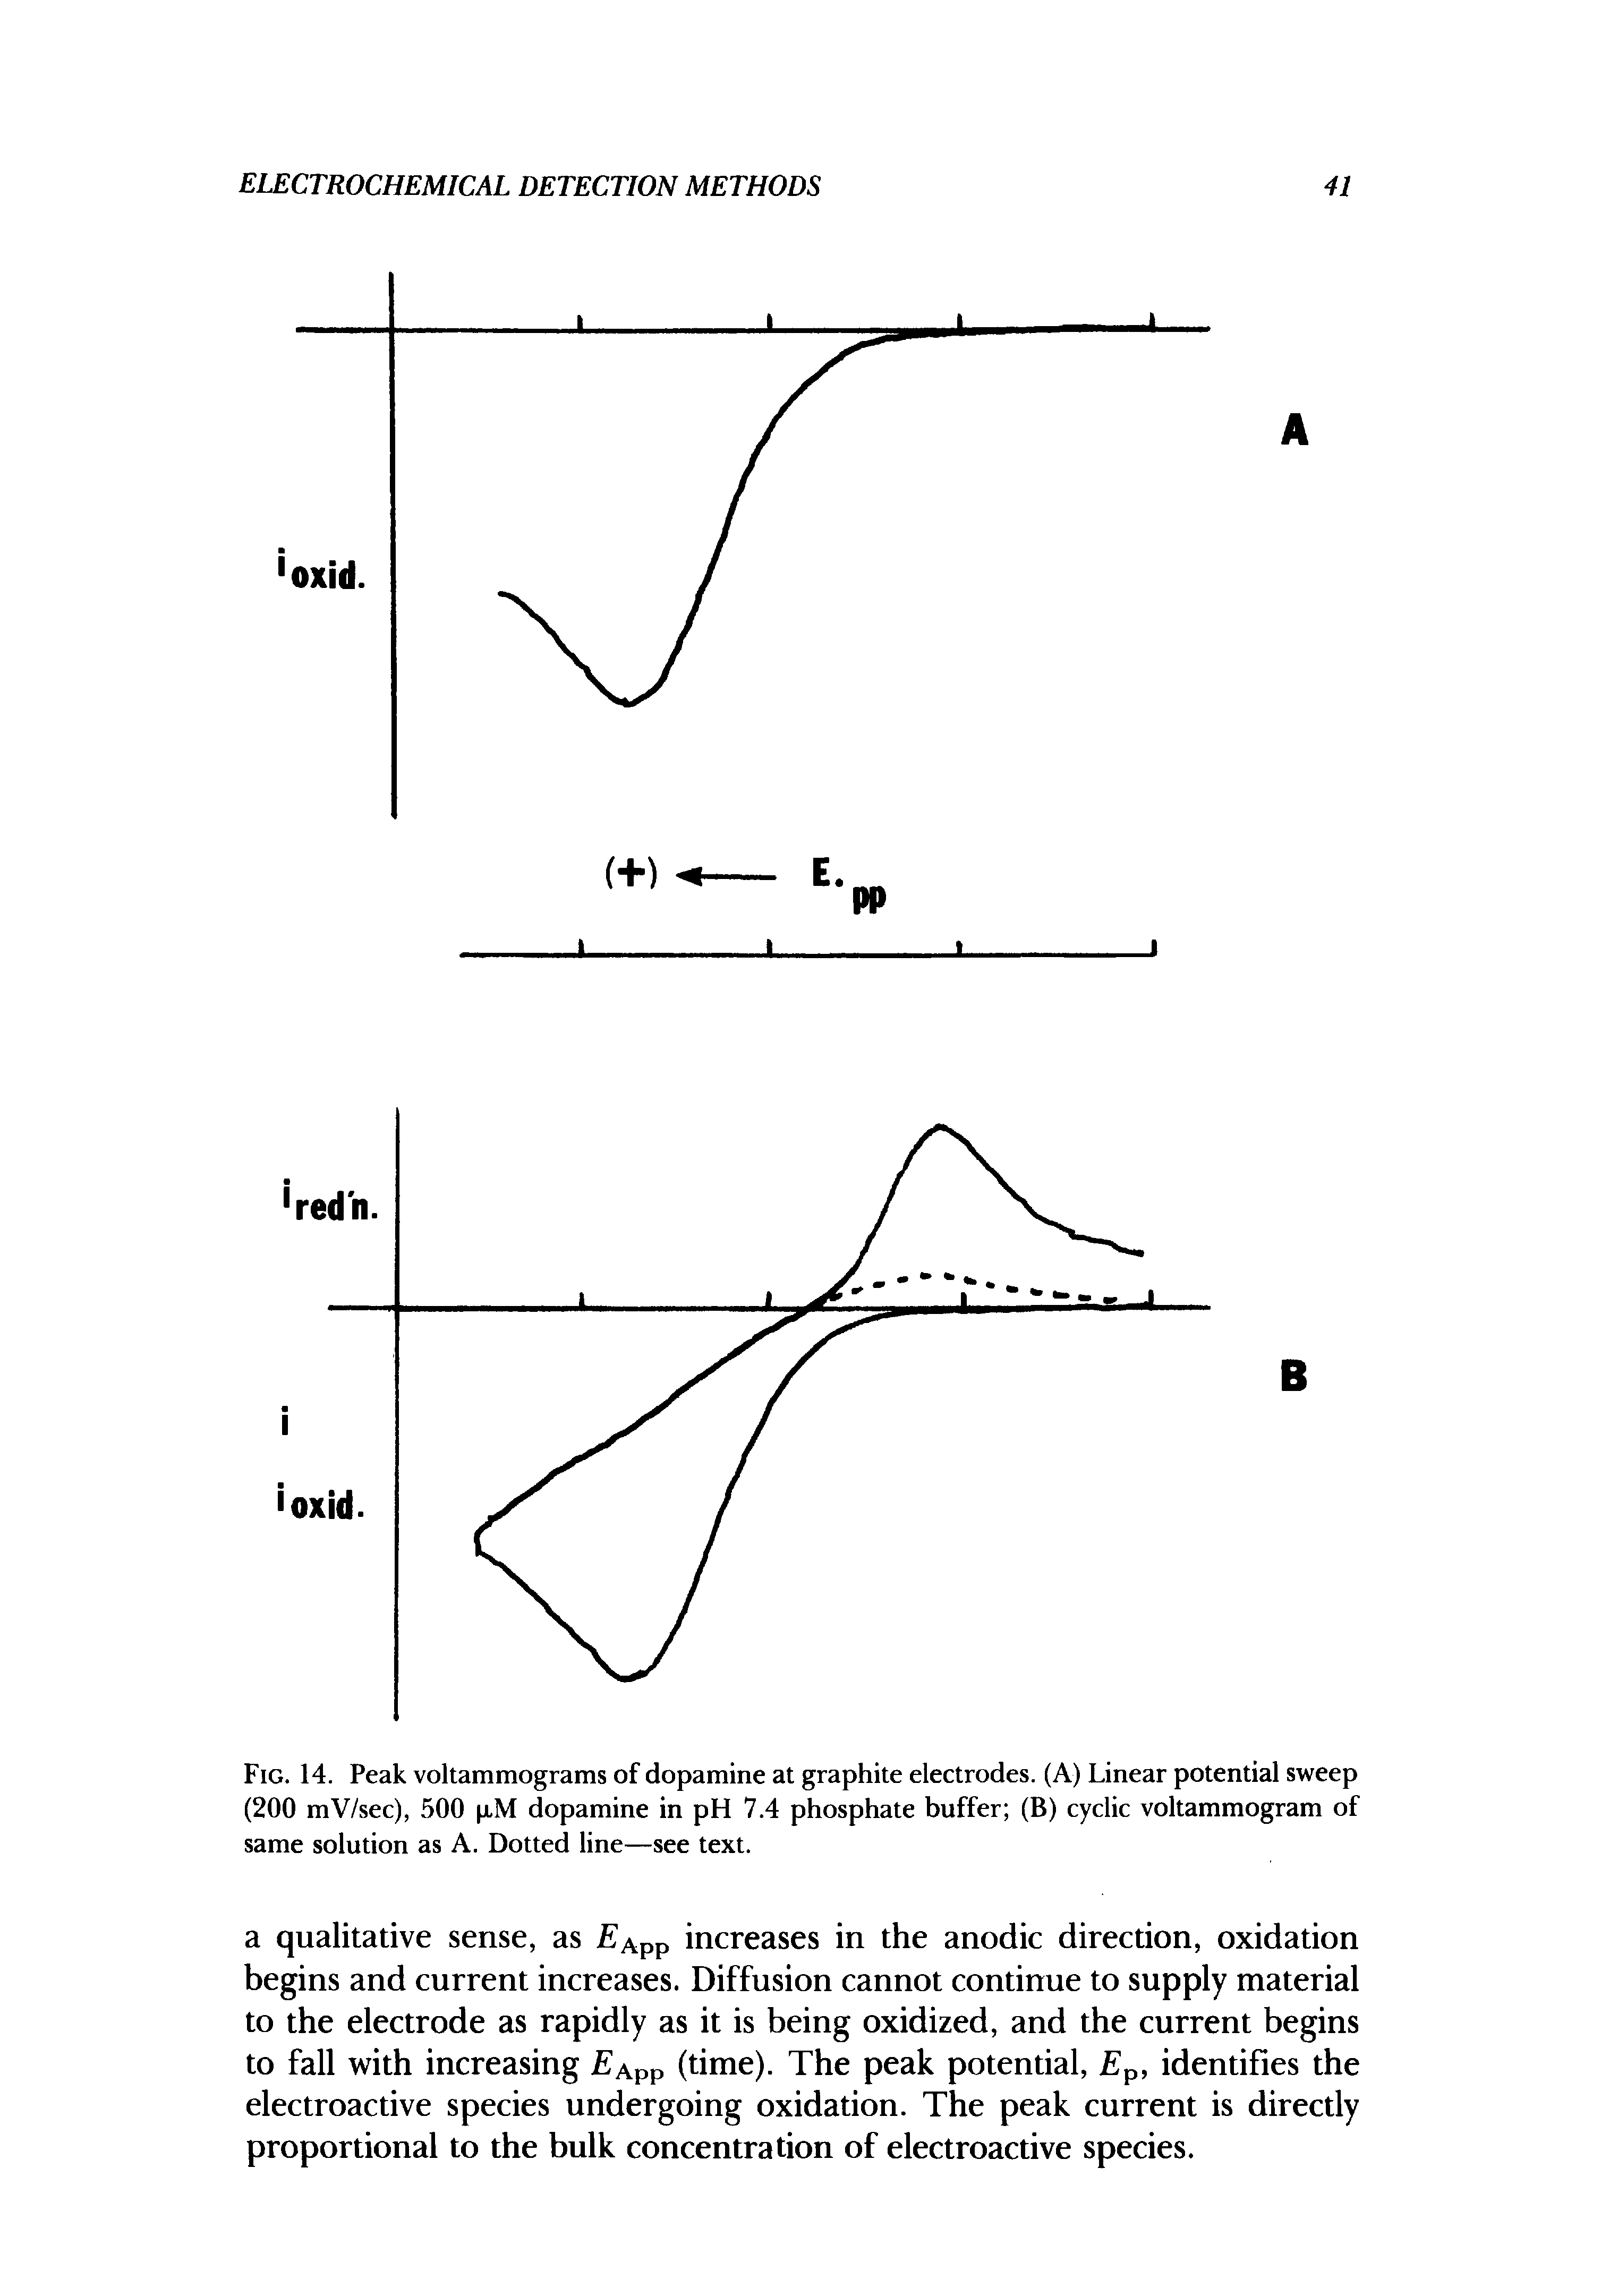 Fig. 14. Peak voltammograms of dopamine at graphite electrodes. (A) Linear potential sweep (200 mV/sec), 500 pM dopamine in pH 7.4 phosphate buffer (B) cyclic voltammogram of same solution as A. Dotted line—see text.